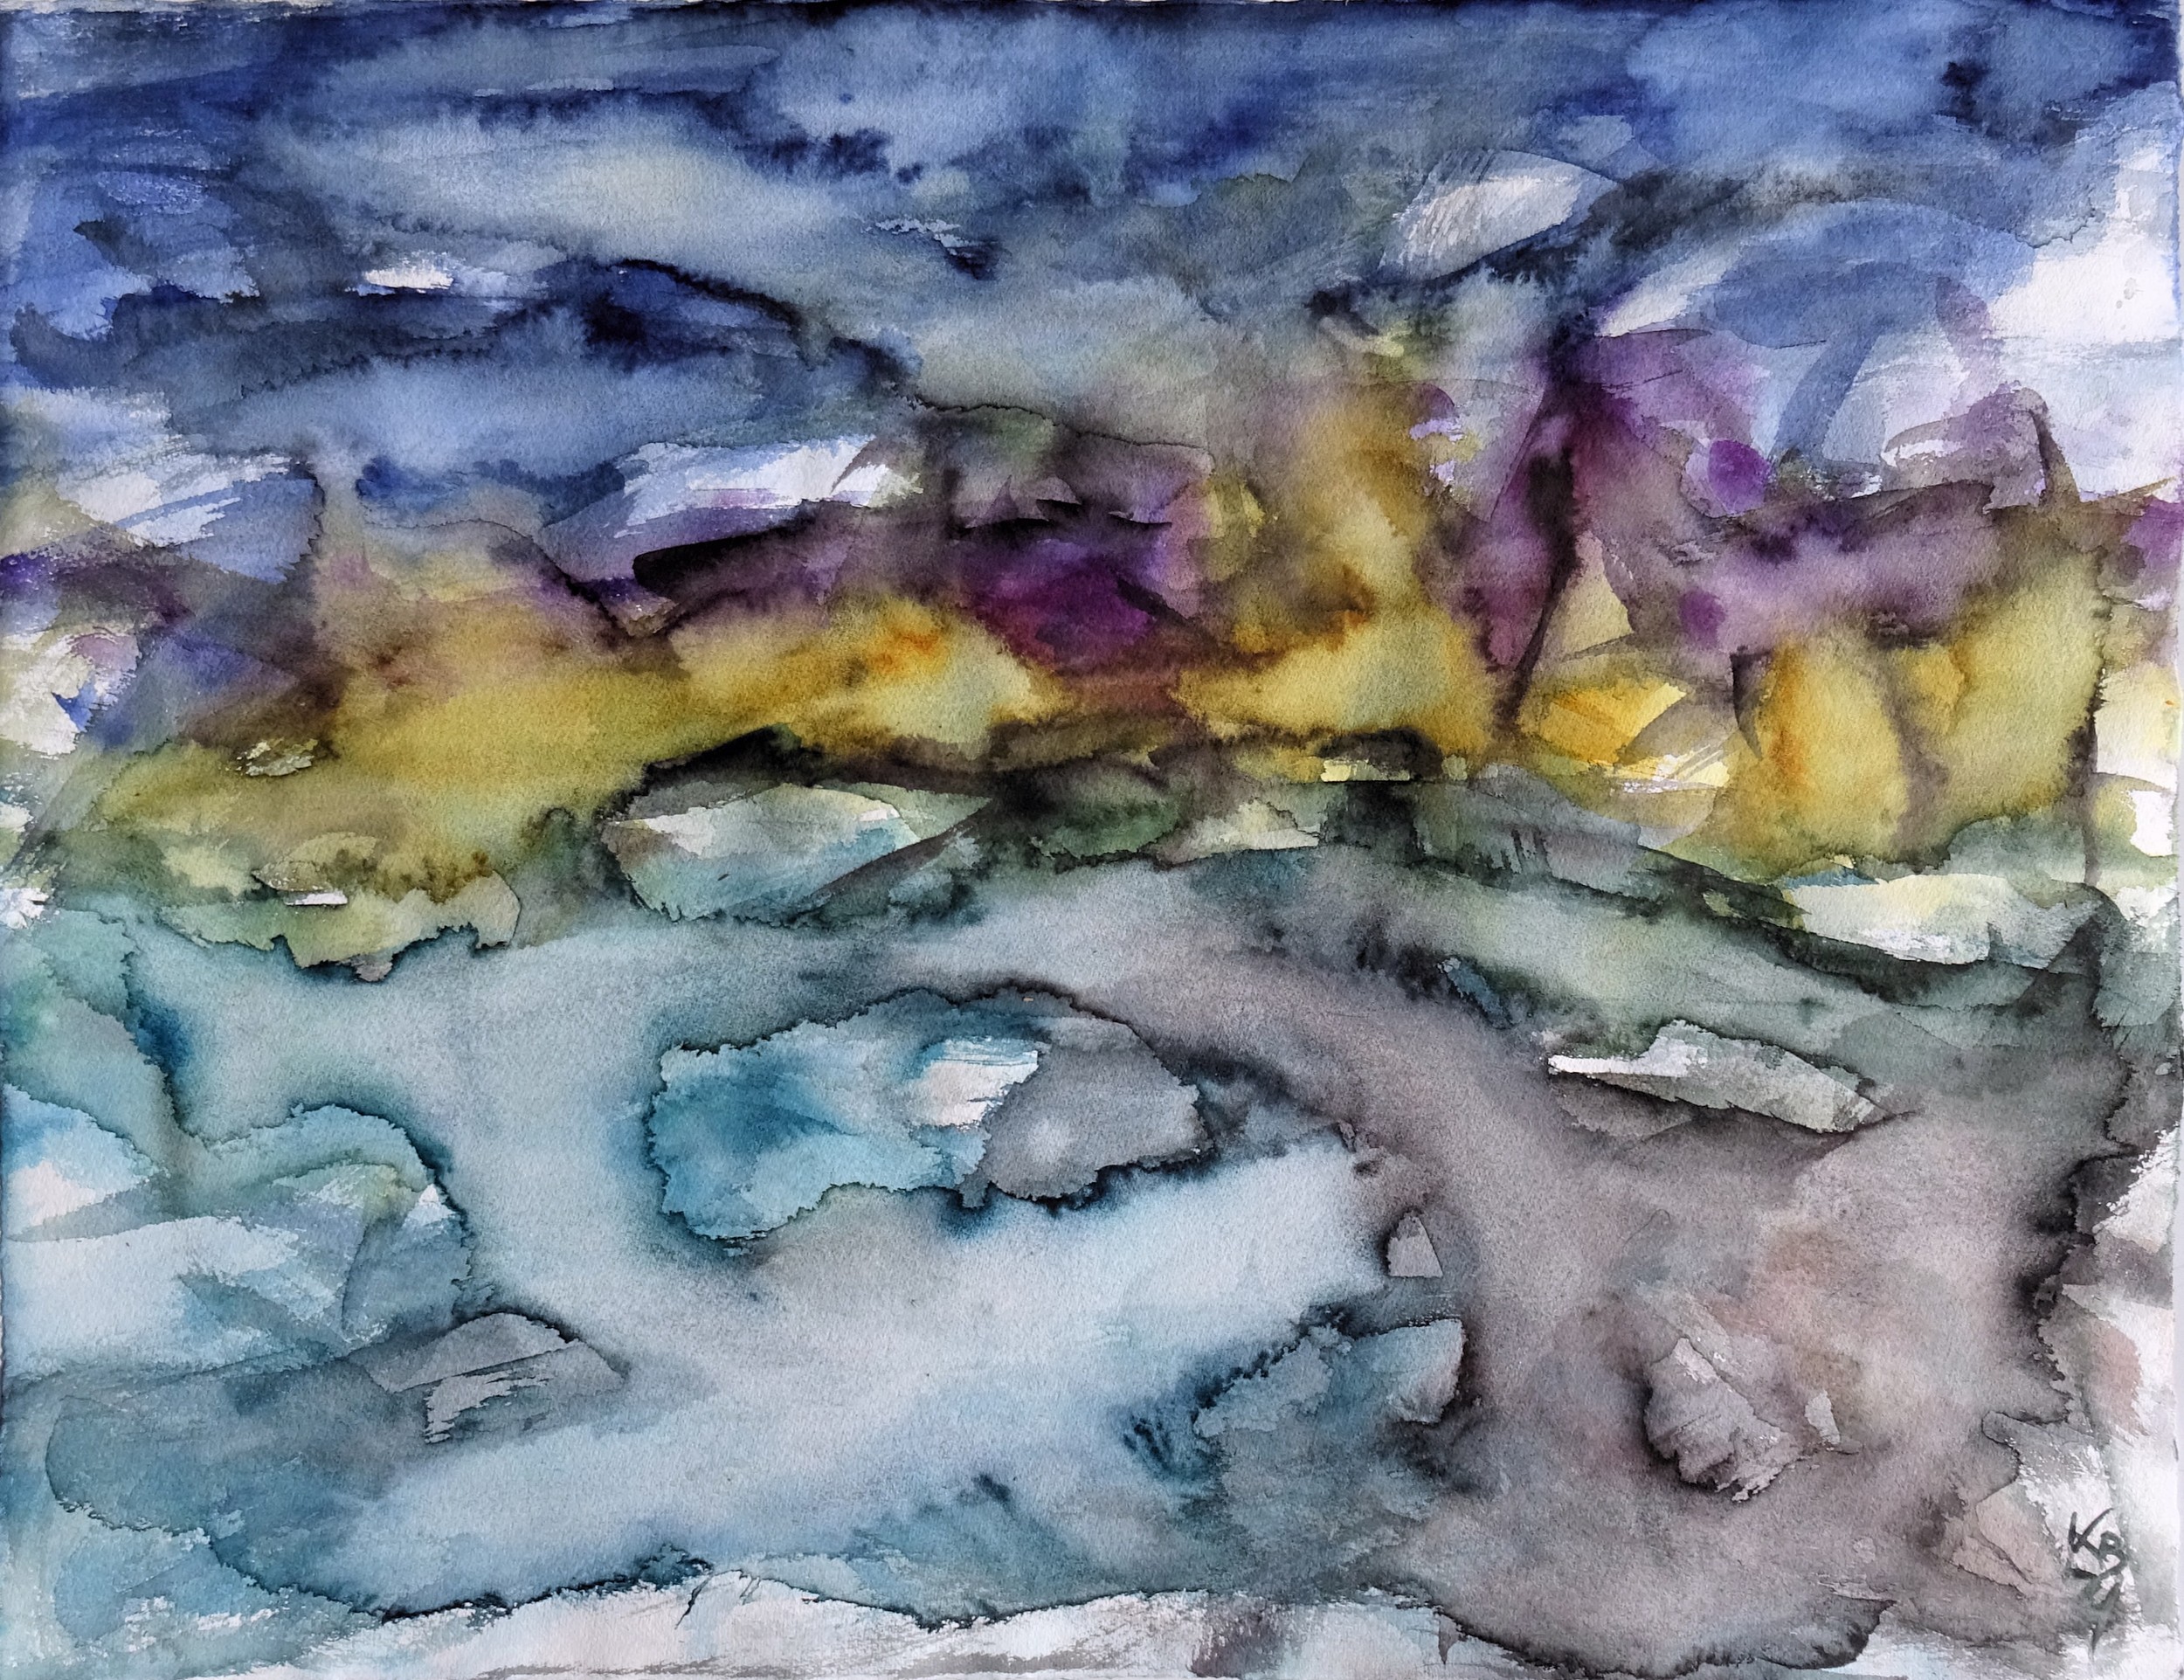 Longing for Islay - Bruichladdich, Watercolour 65 x 50 cm, © 2021 by Klaus Bölling